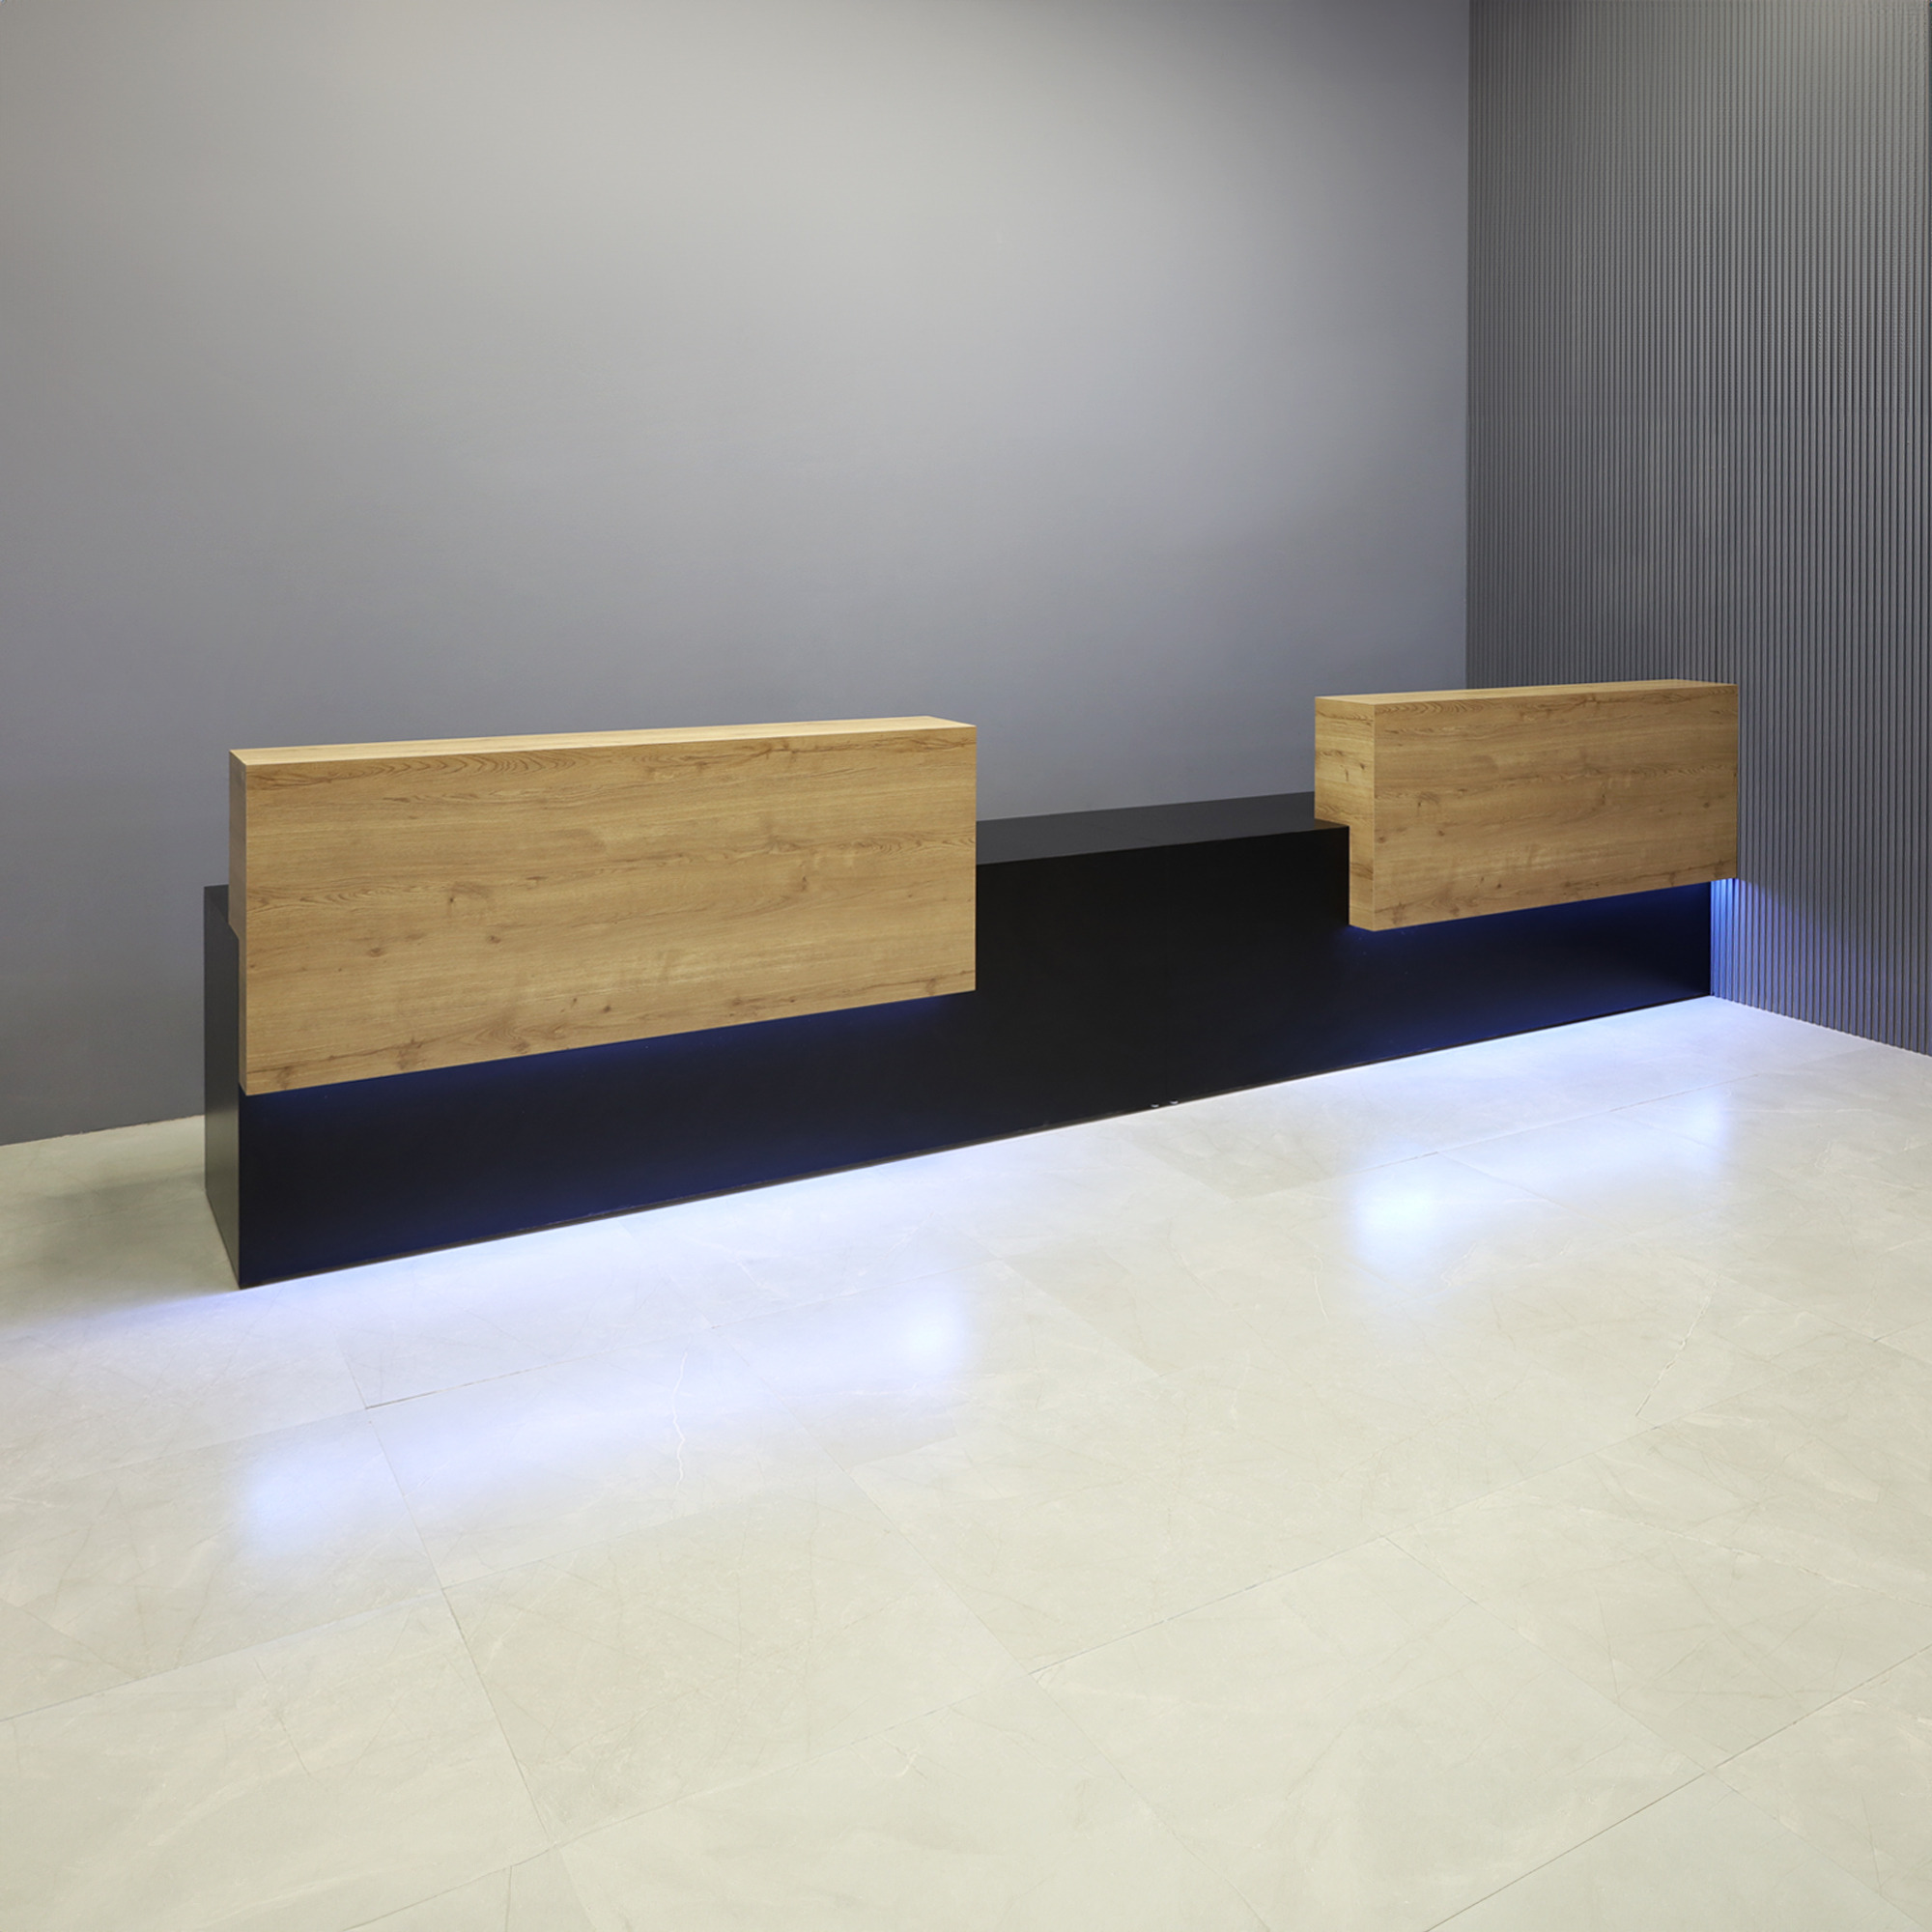 168-inch Los Angeles Double Counter Custom Reception Desk in planked urban oak matte laminate counters and black matte laminate desks, with color LED, shown here.